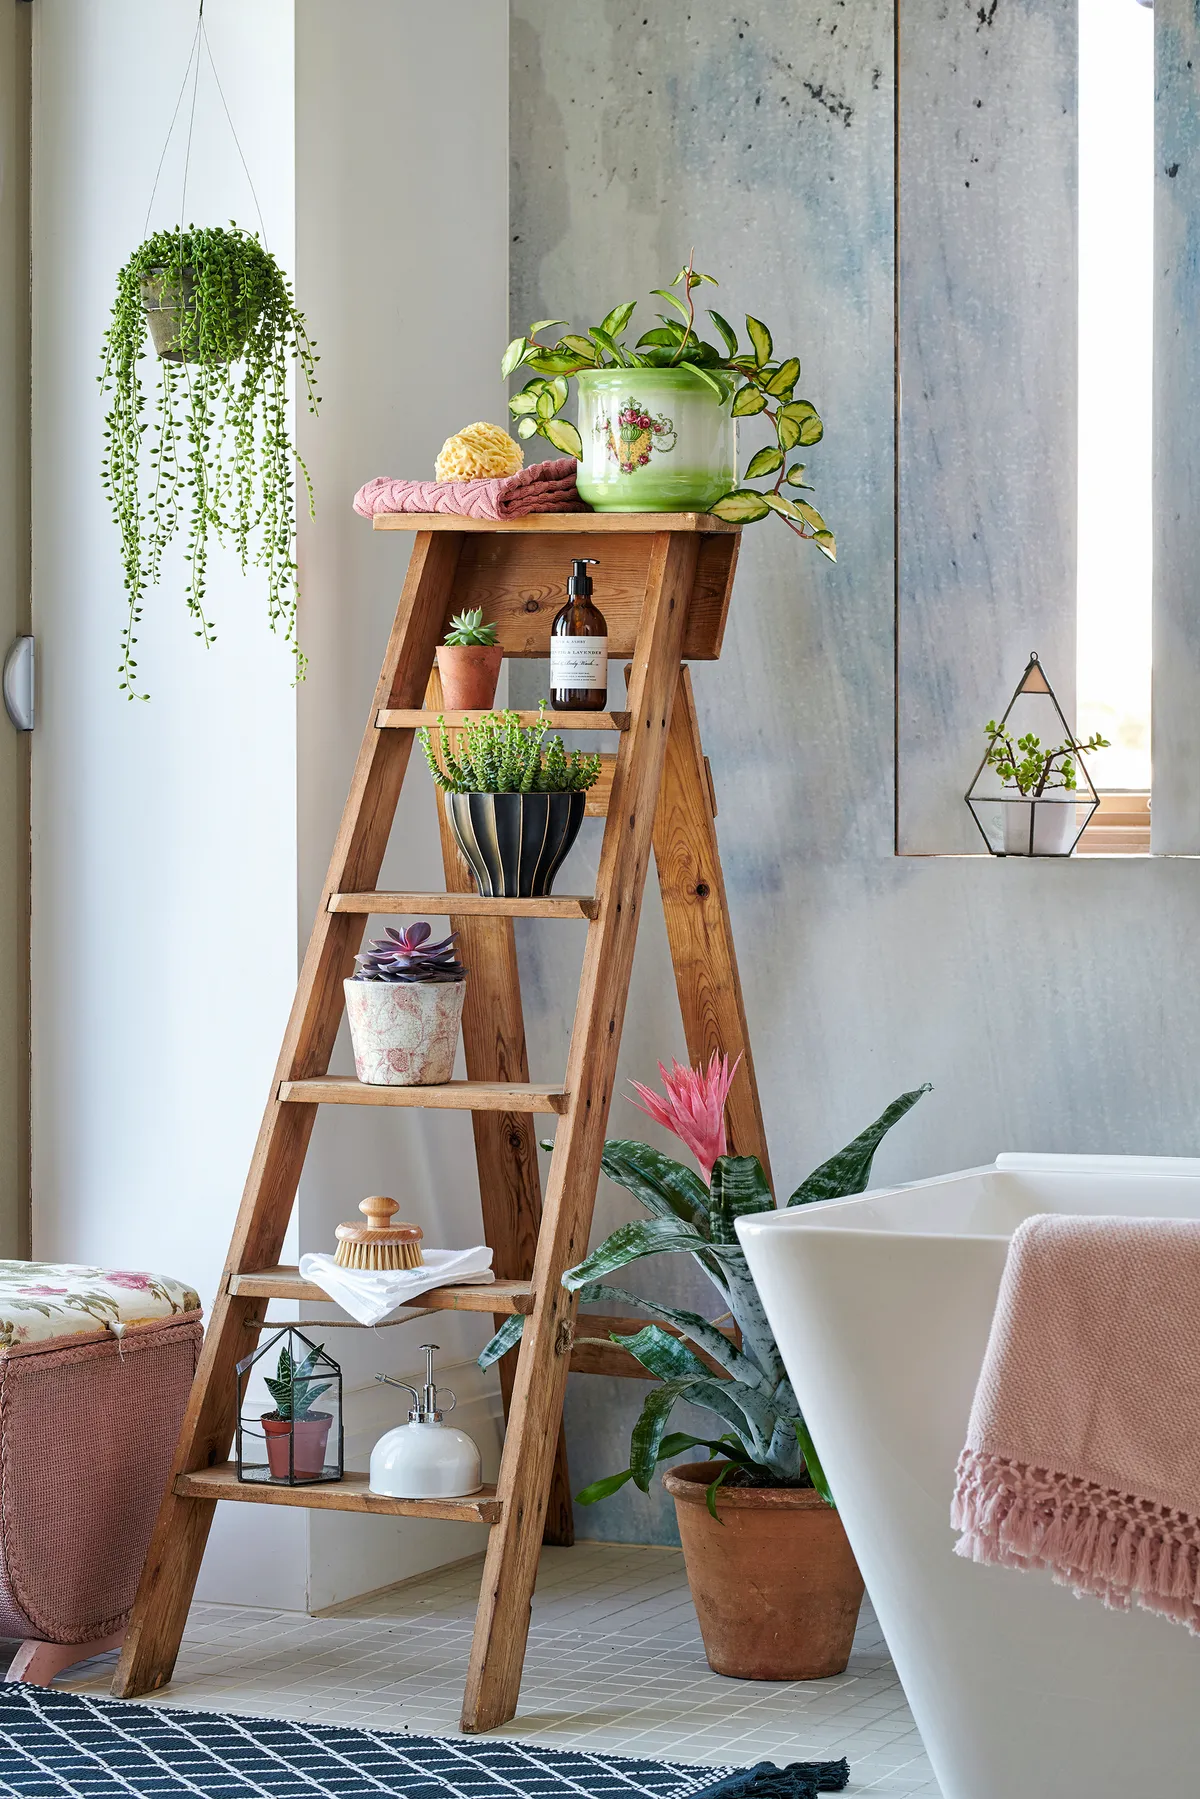 A vintage stepladder used to display small succulents and beauty products in a bathroom.